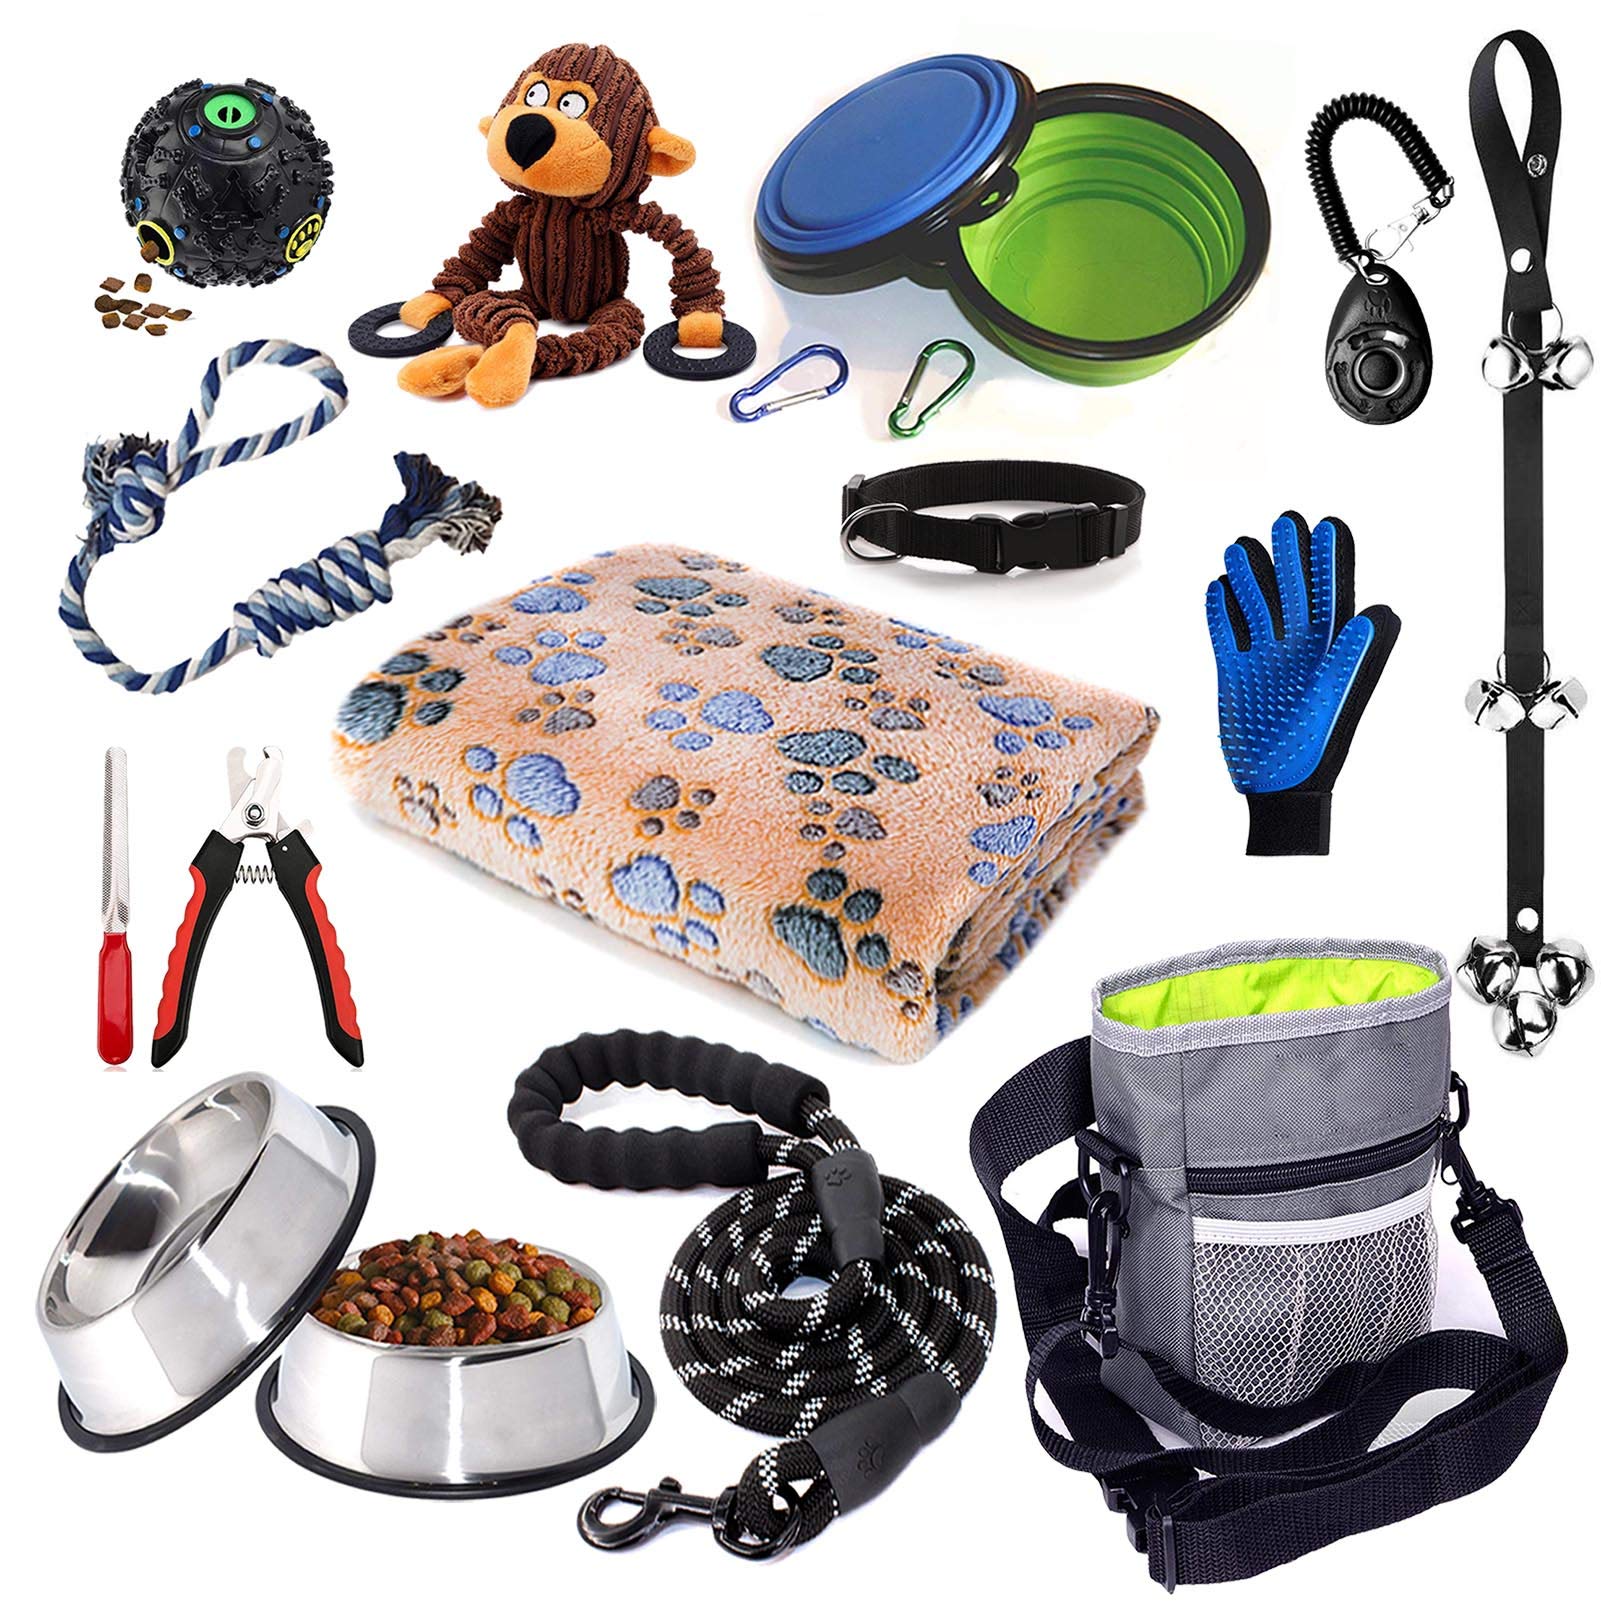 Book Cover Puppy Starter Kit,15 Piece Dog Supplies Assortments,Set Includes:Dog Toys | Dog Essentials | Puppy Training Supplies | Dog Grooming Tool | Dog Leashes Accessories | Feeding & Watering Supplies Upgraded Version Puppy Supplies Set